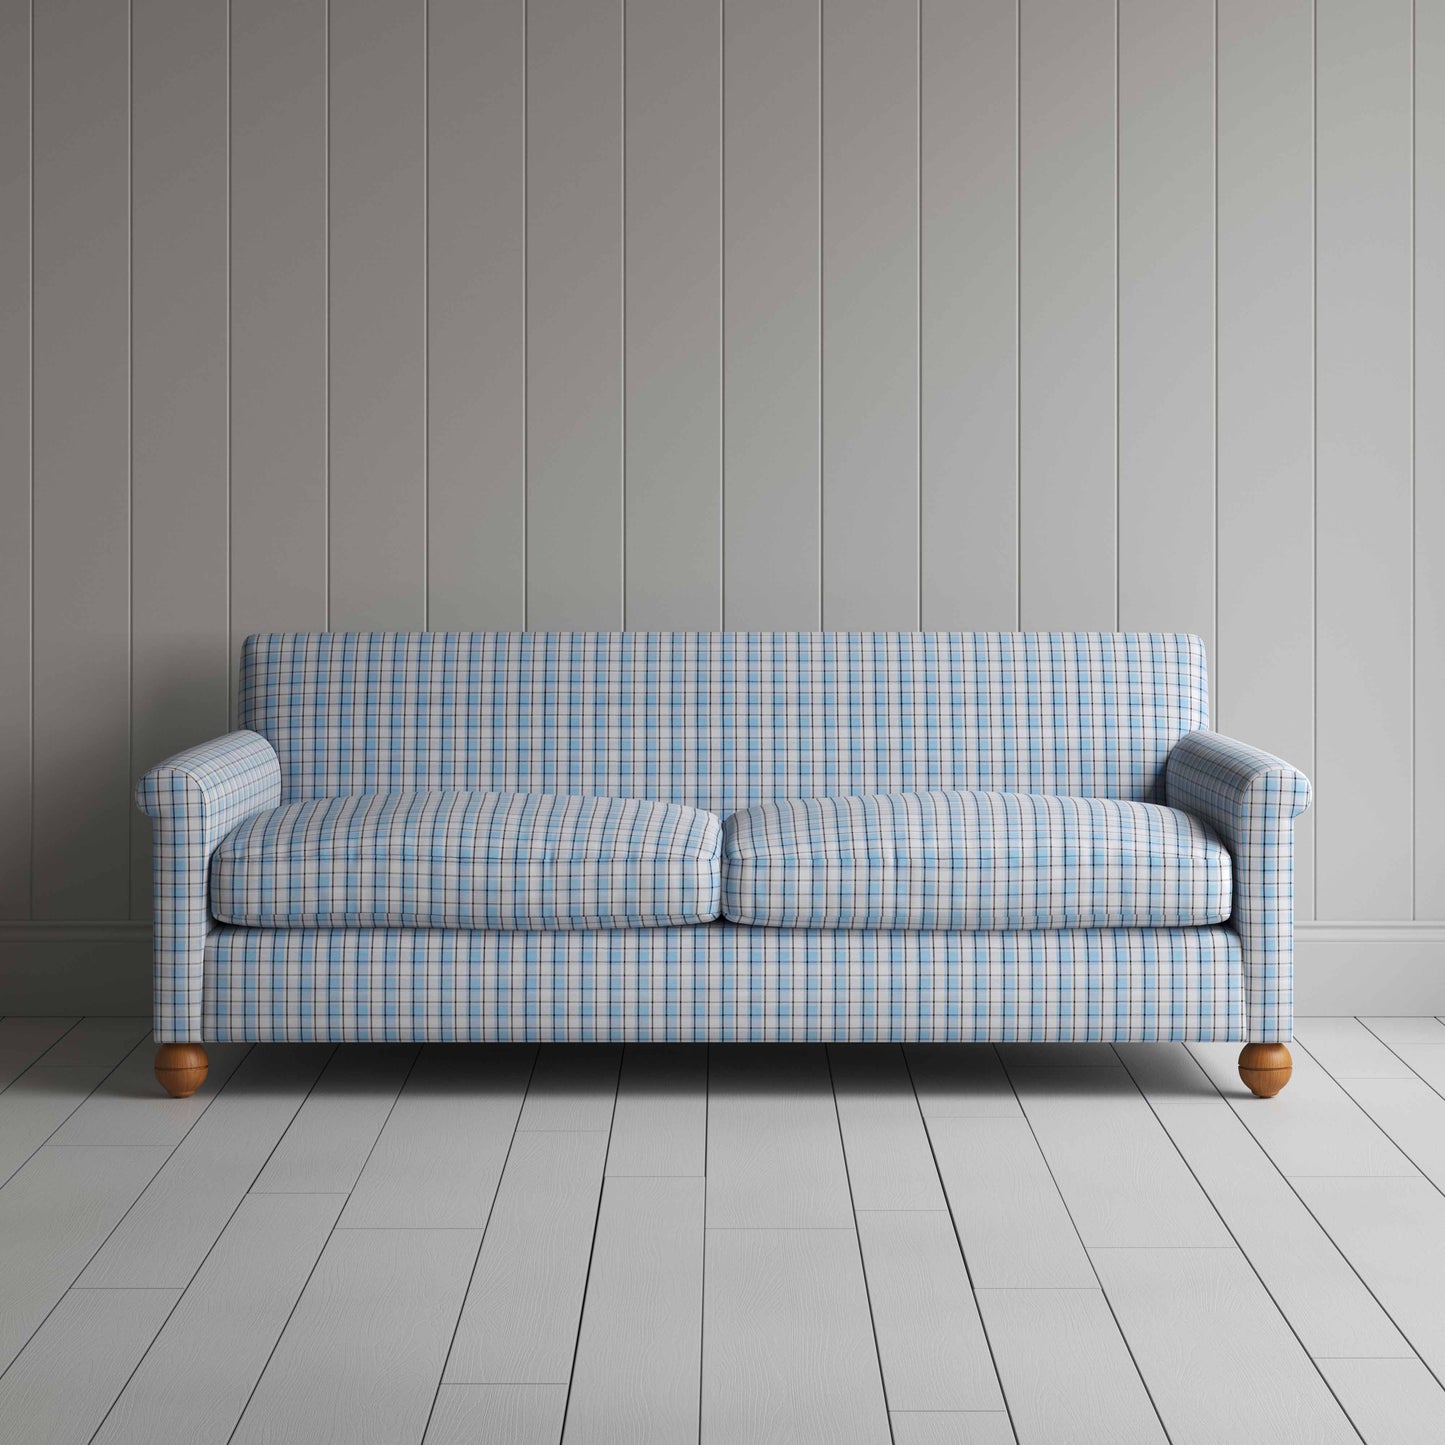 Idler 4 Seater Sofa in Square Deal Cotton, Blue Brown